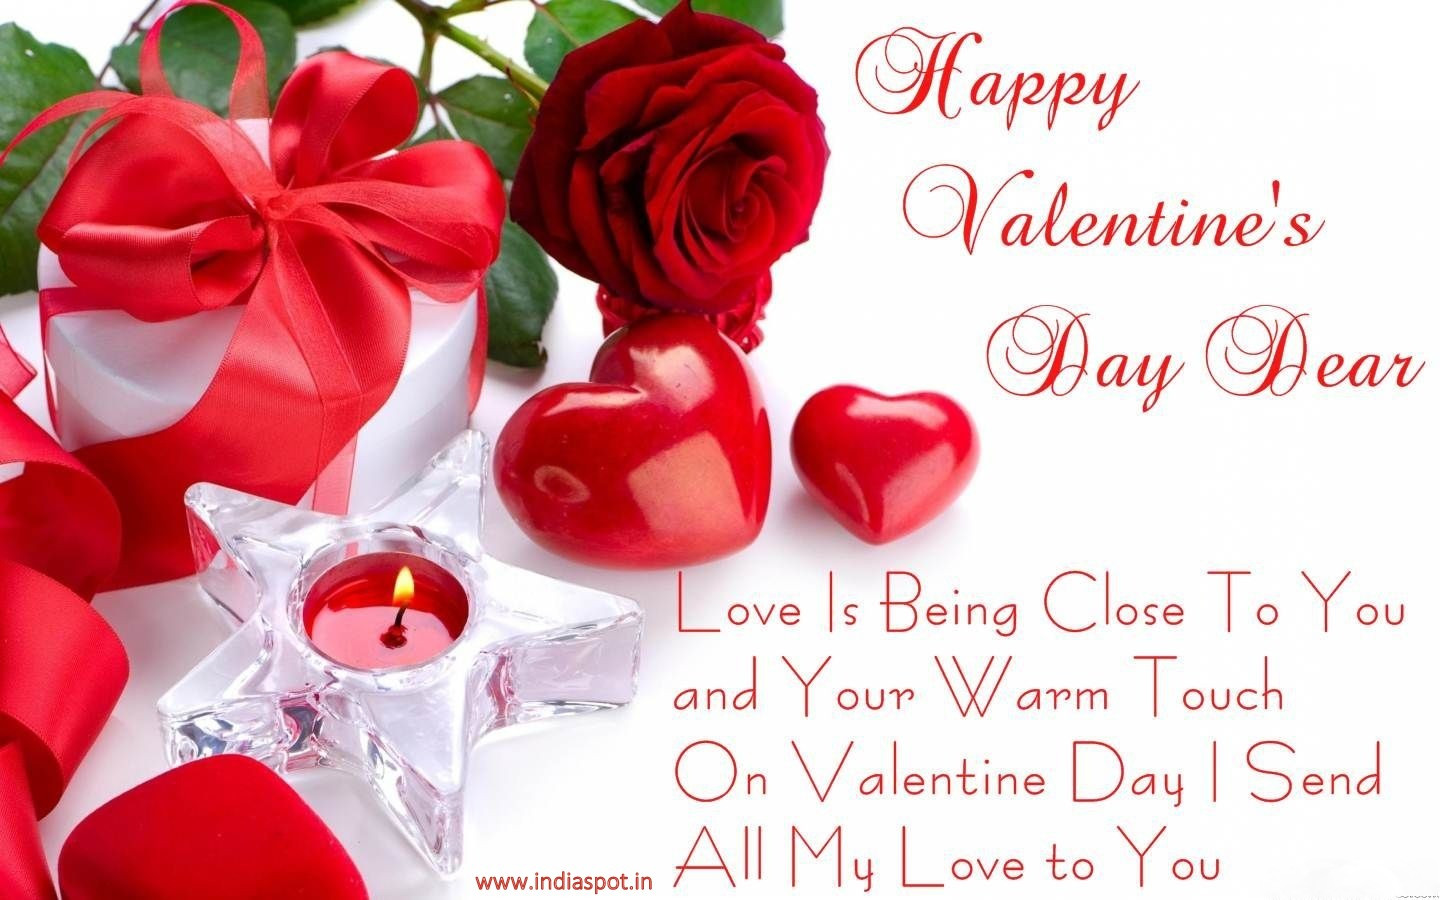 Valentines Day Pic And Quotes
 Happy Valentine’s Day Quotes [2021 Update]